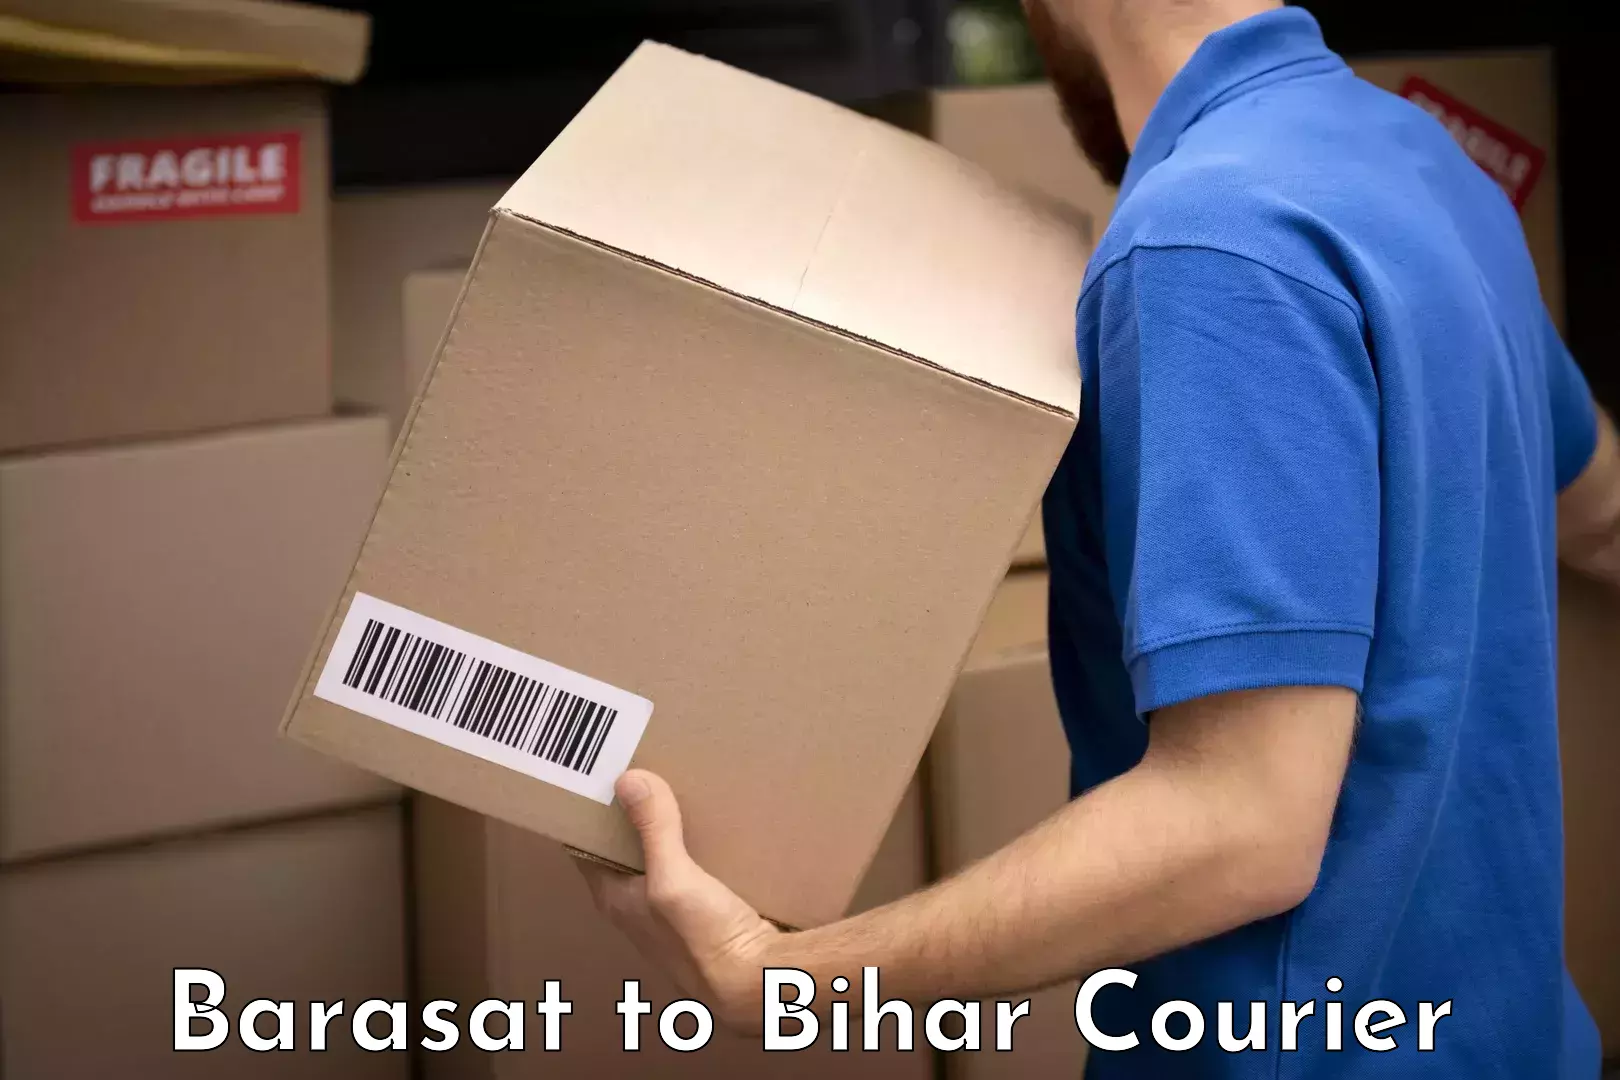 Baggage shipping experience Barasat to Brahmapur